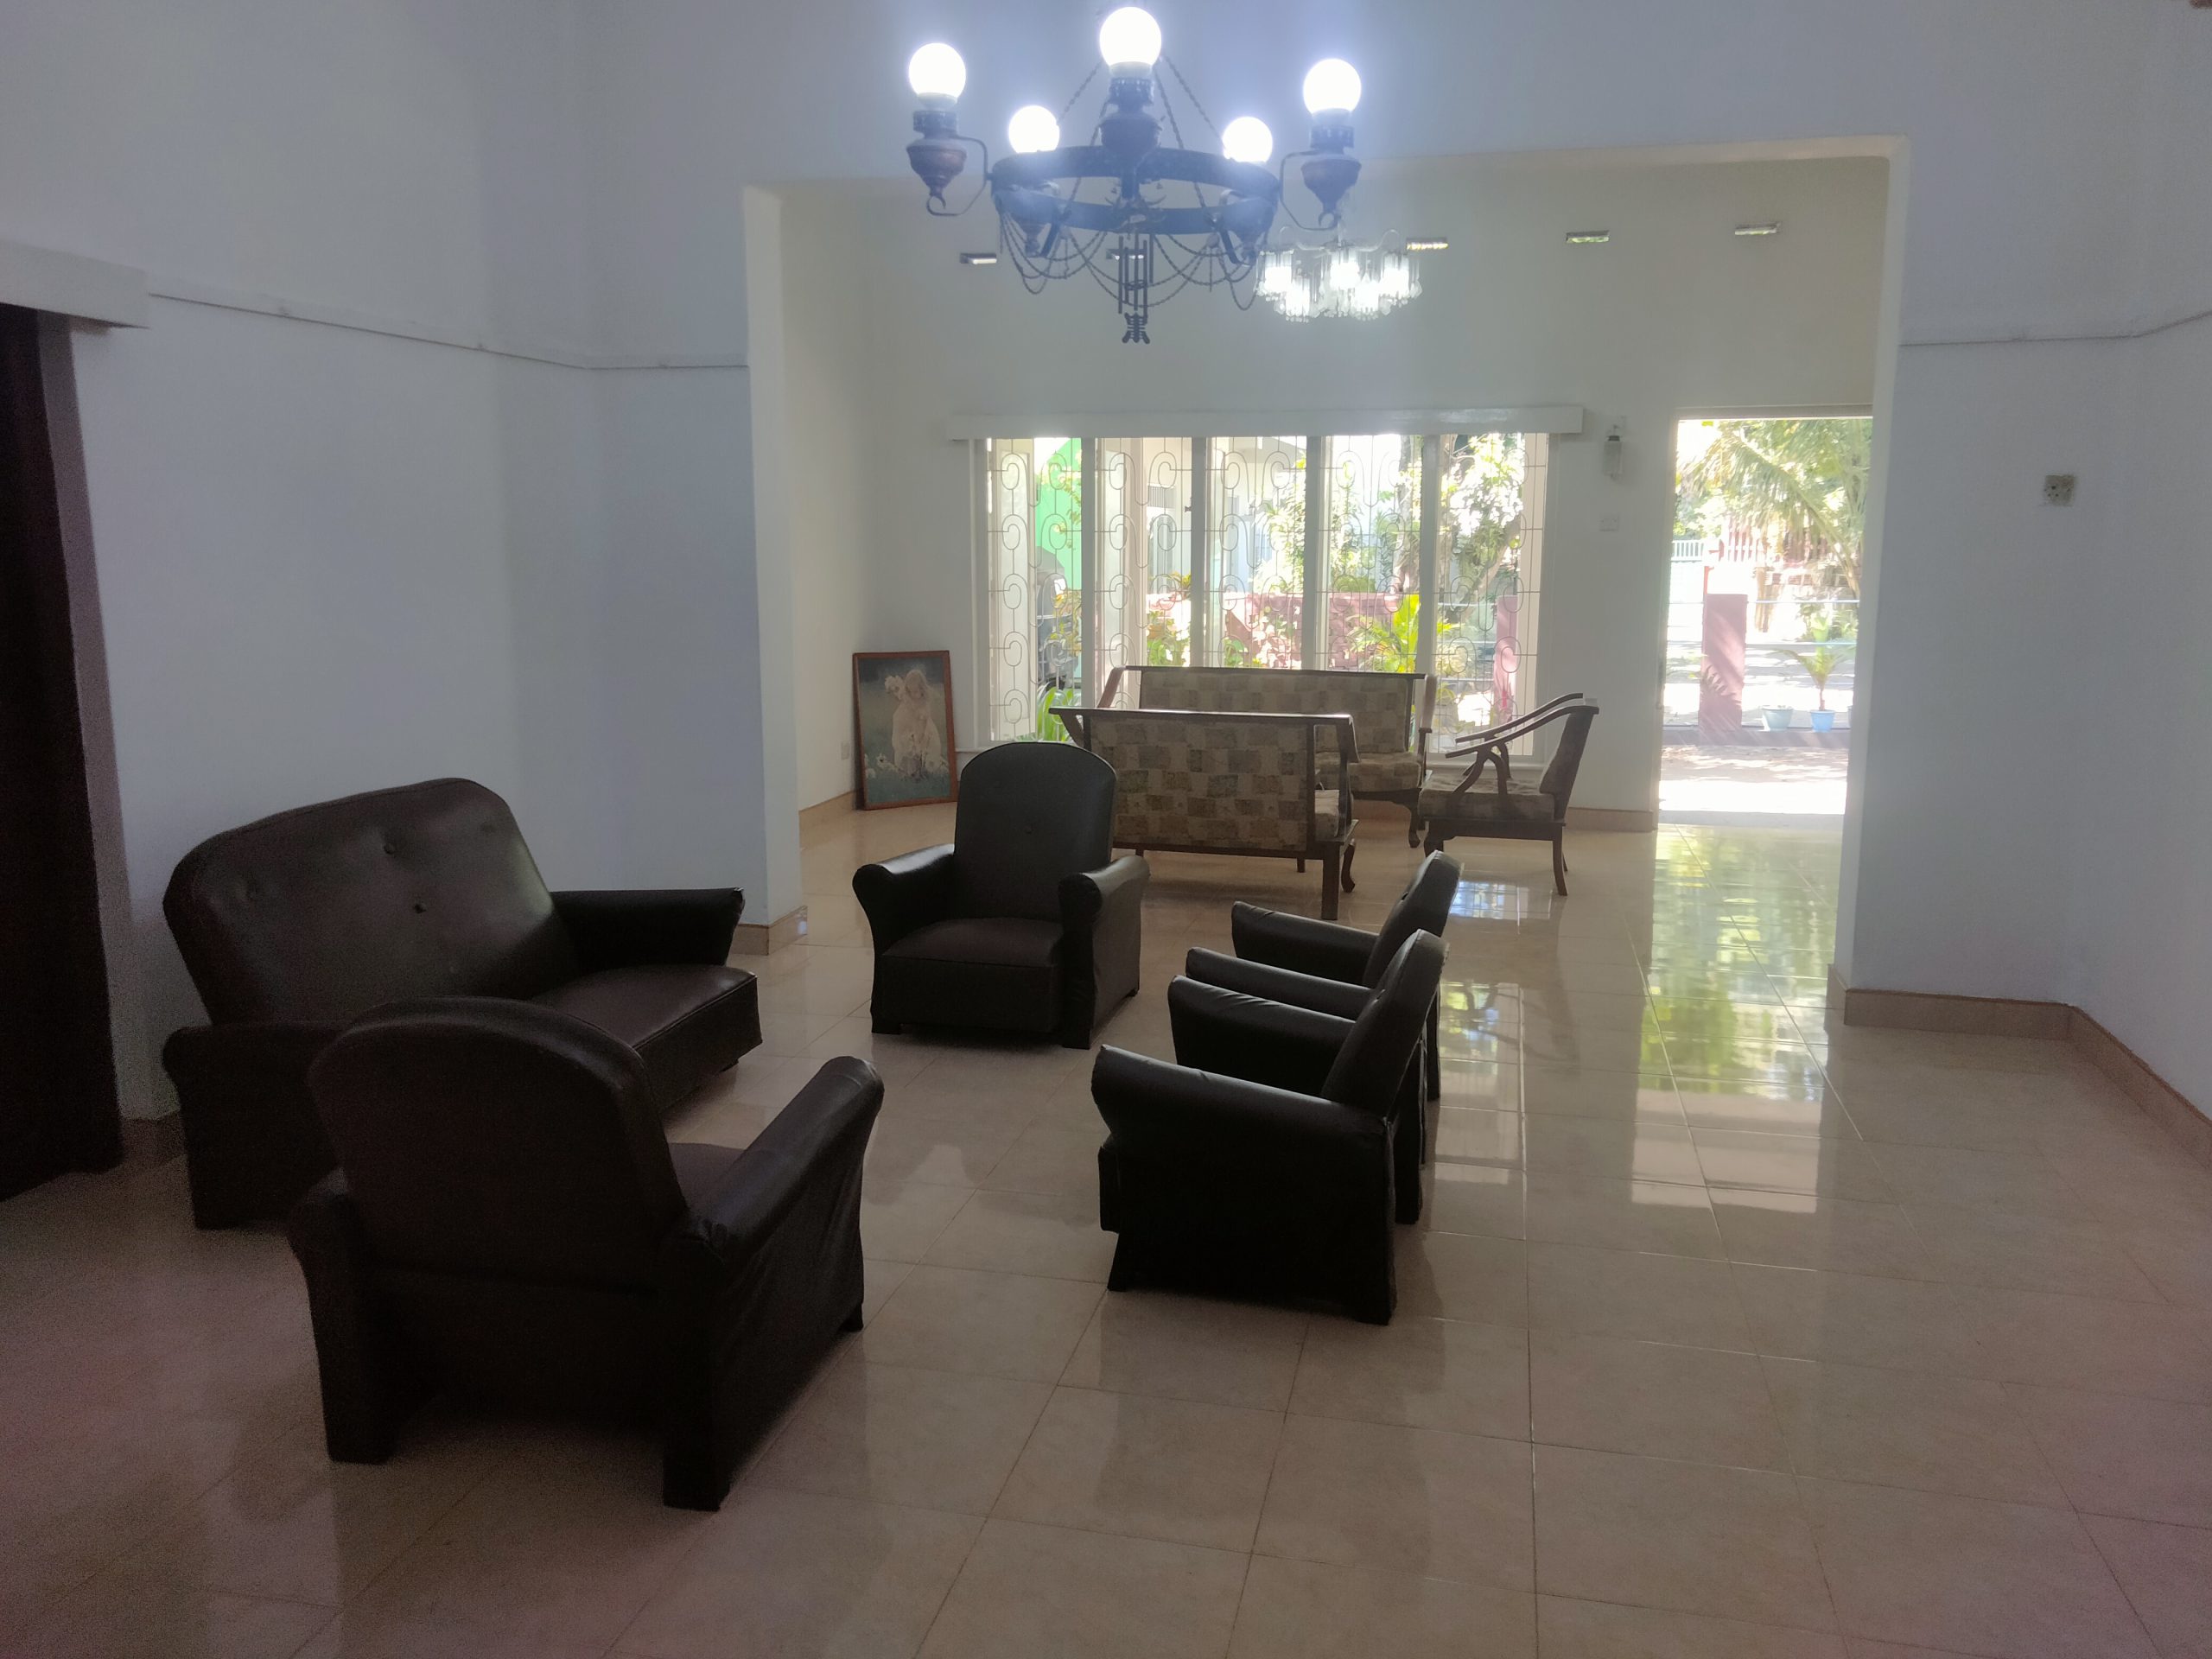 SRI LANKA – KANDY – A Solid/Well-Maintained House for Sale.